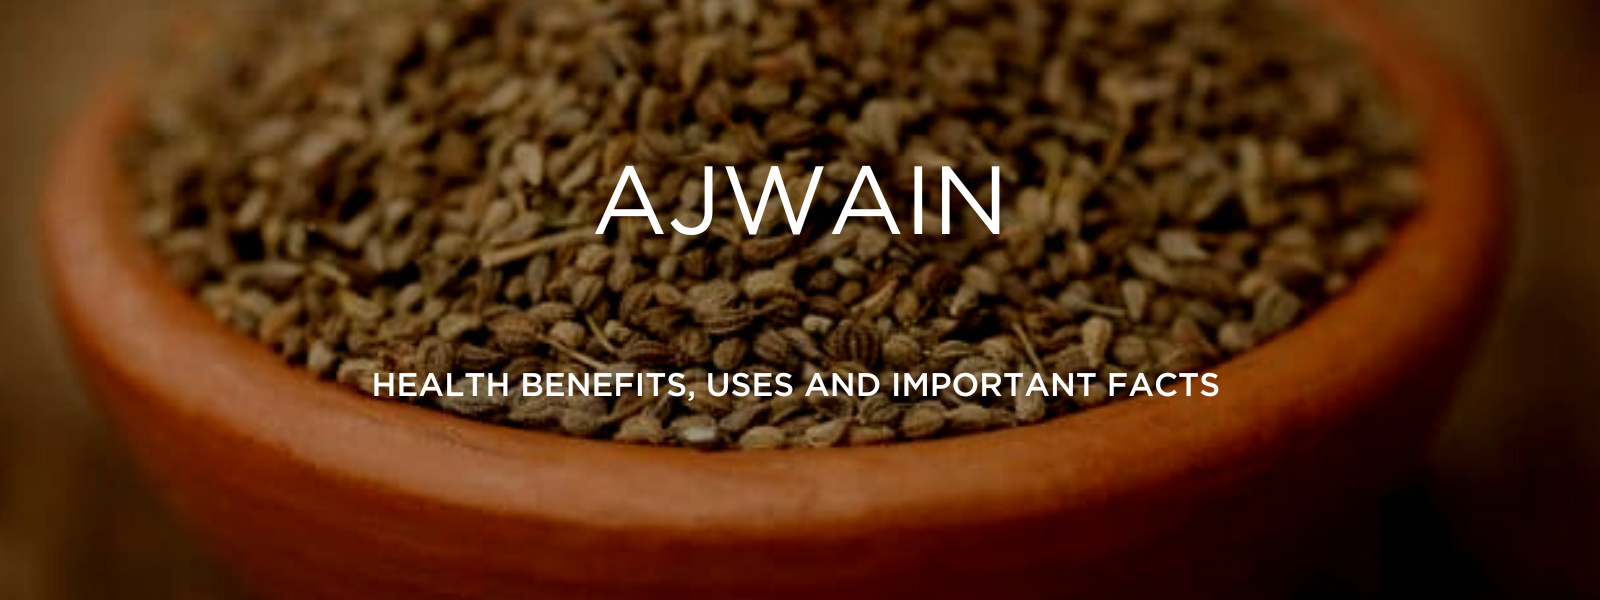 Ajwain - Health Benefits, Uses and Important Facts